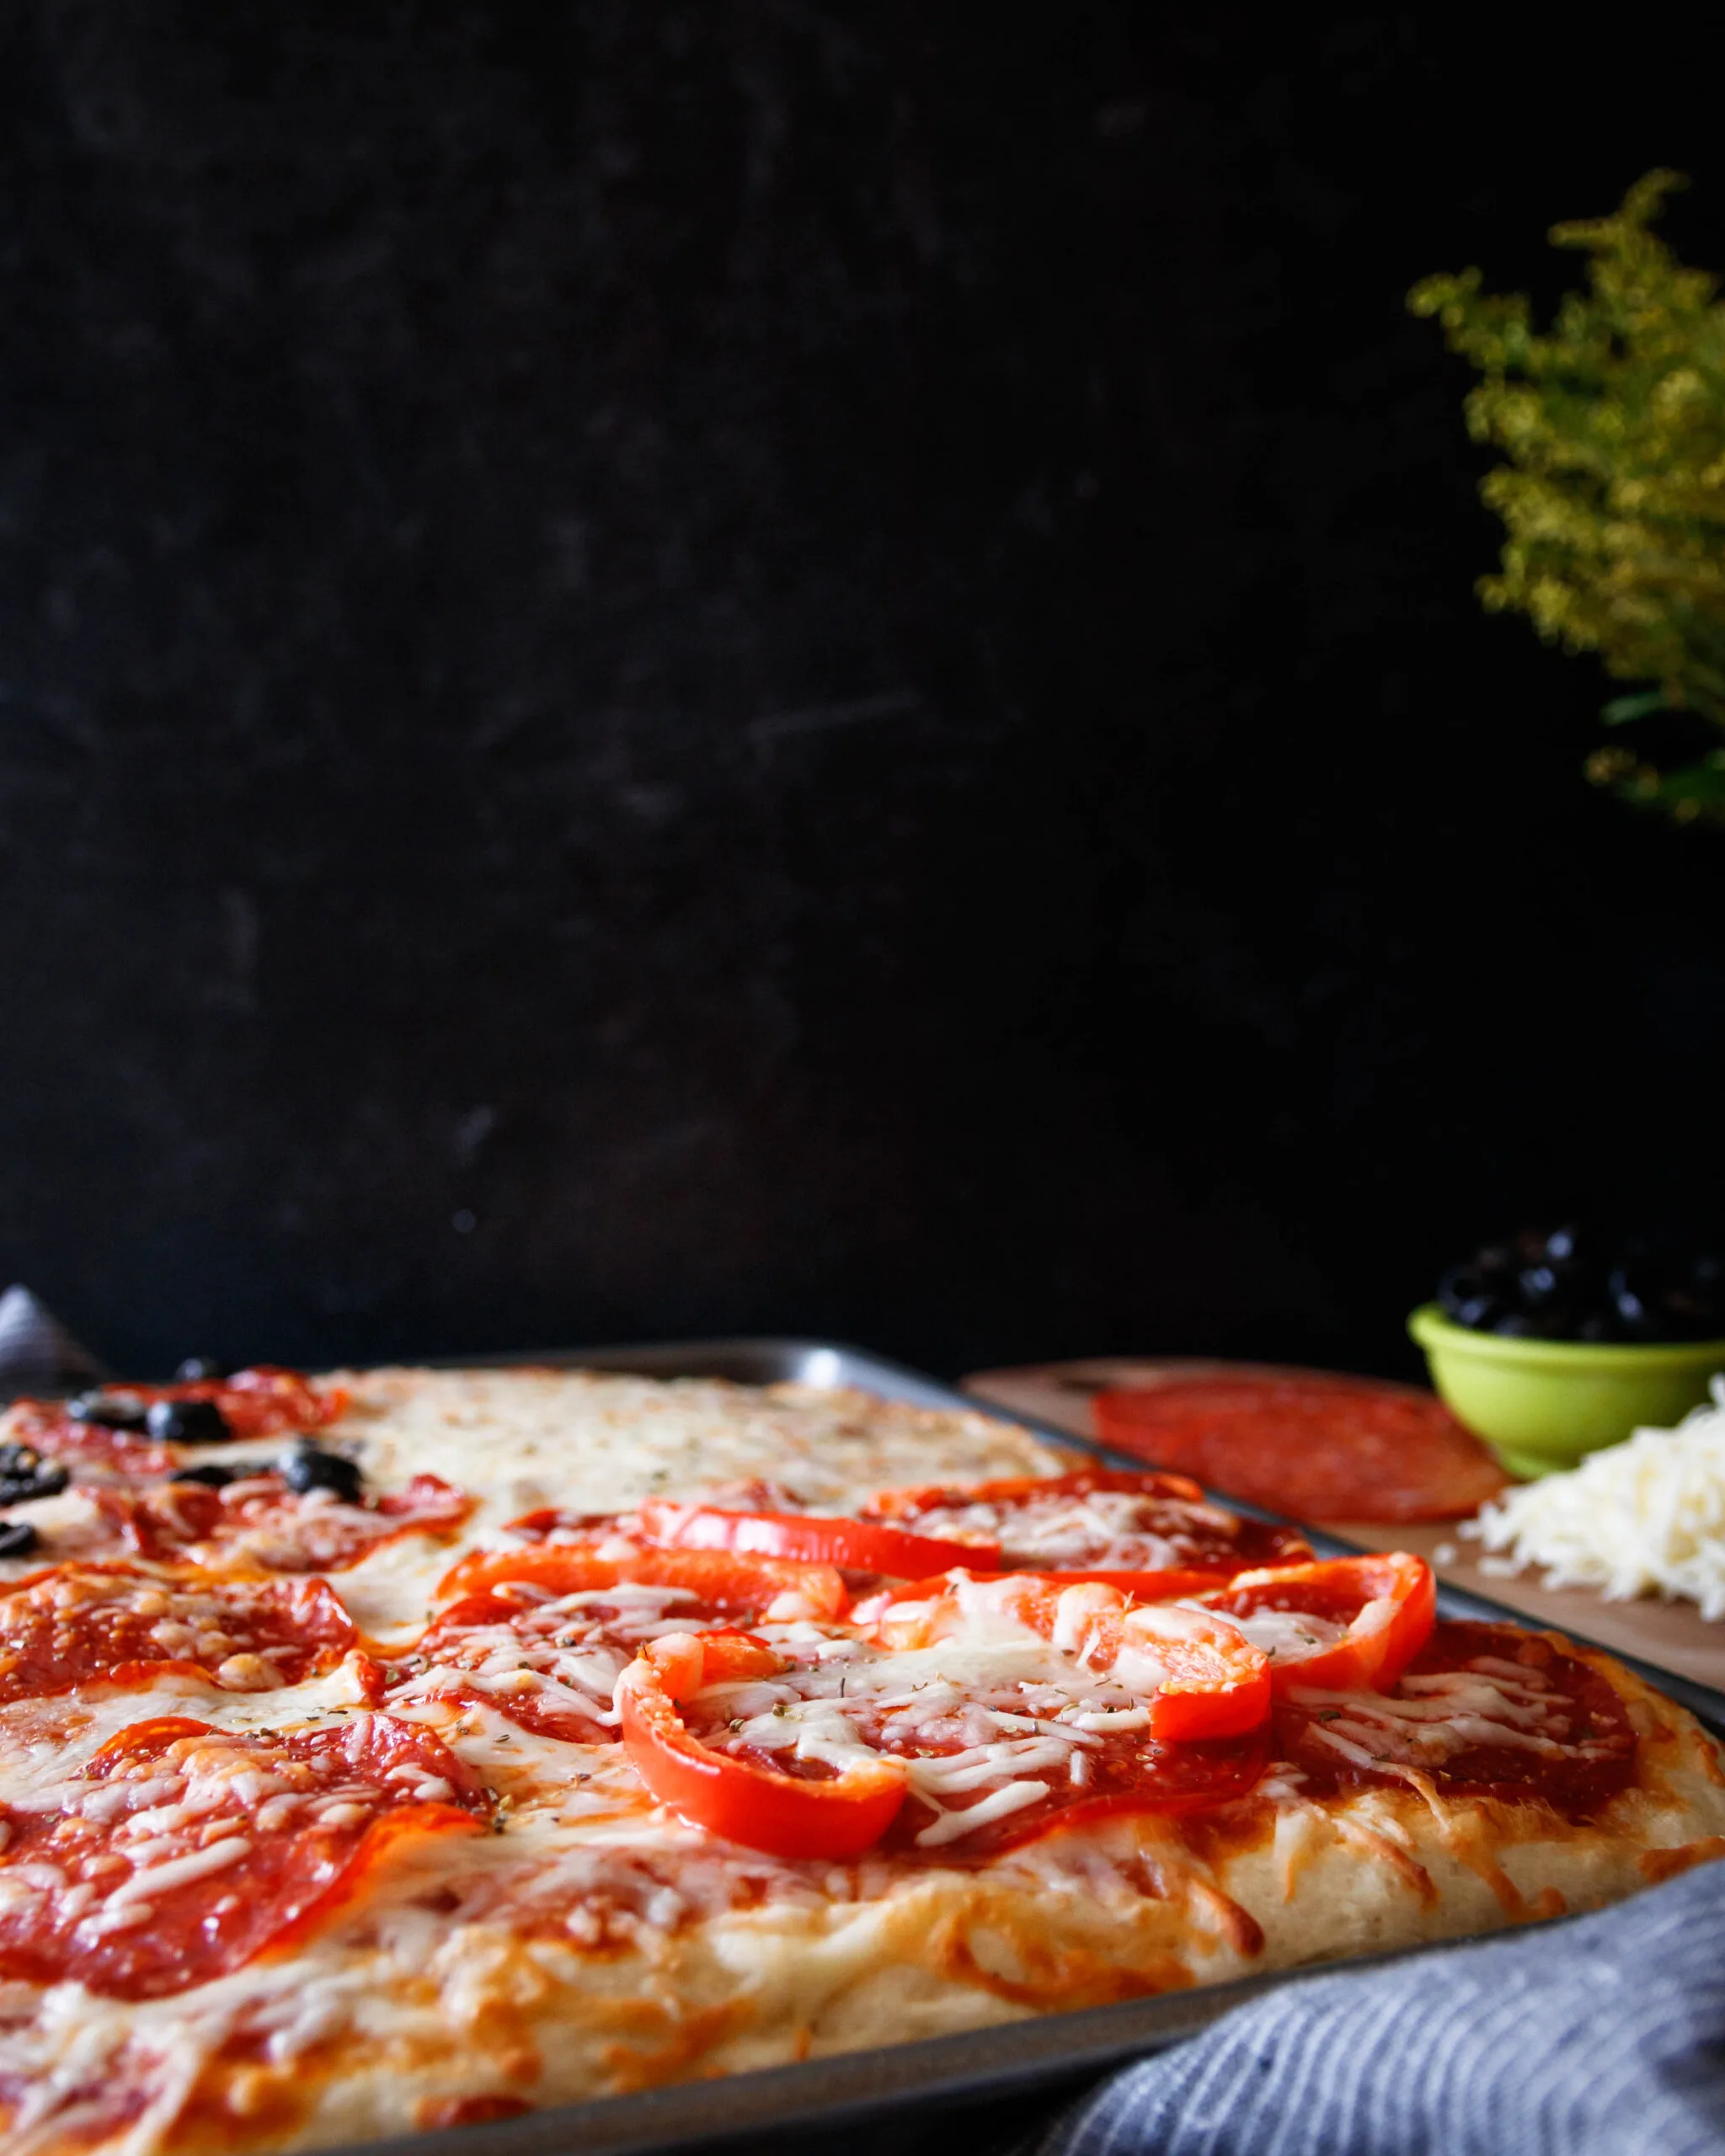 baked pizza resting in the pan on a table with olives and pepperoni in the background. Black backdrop.